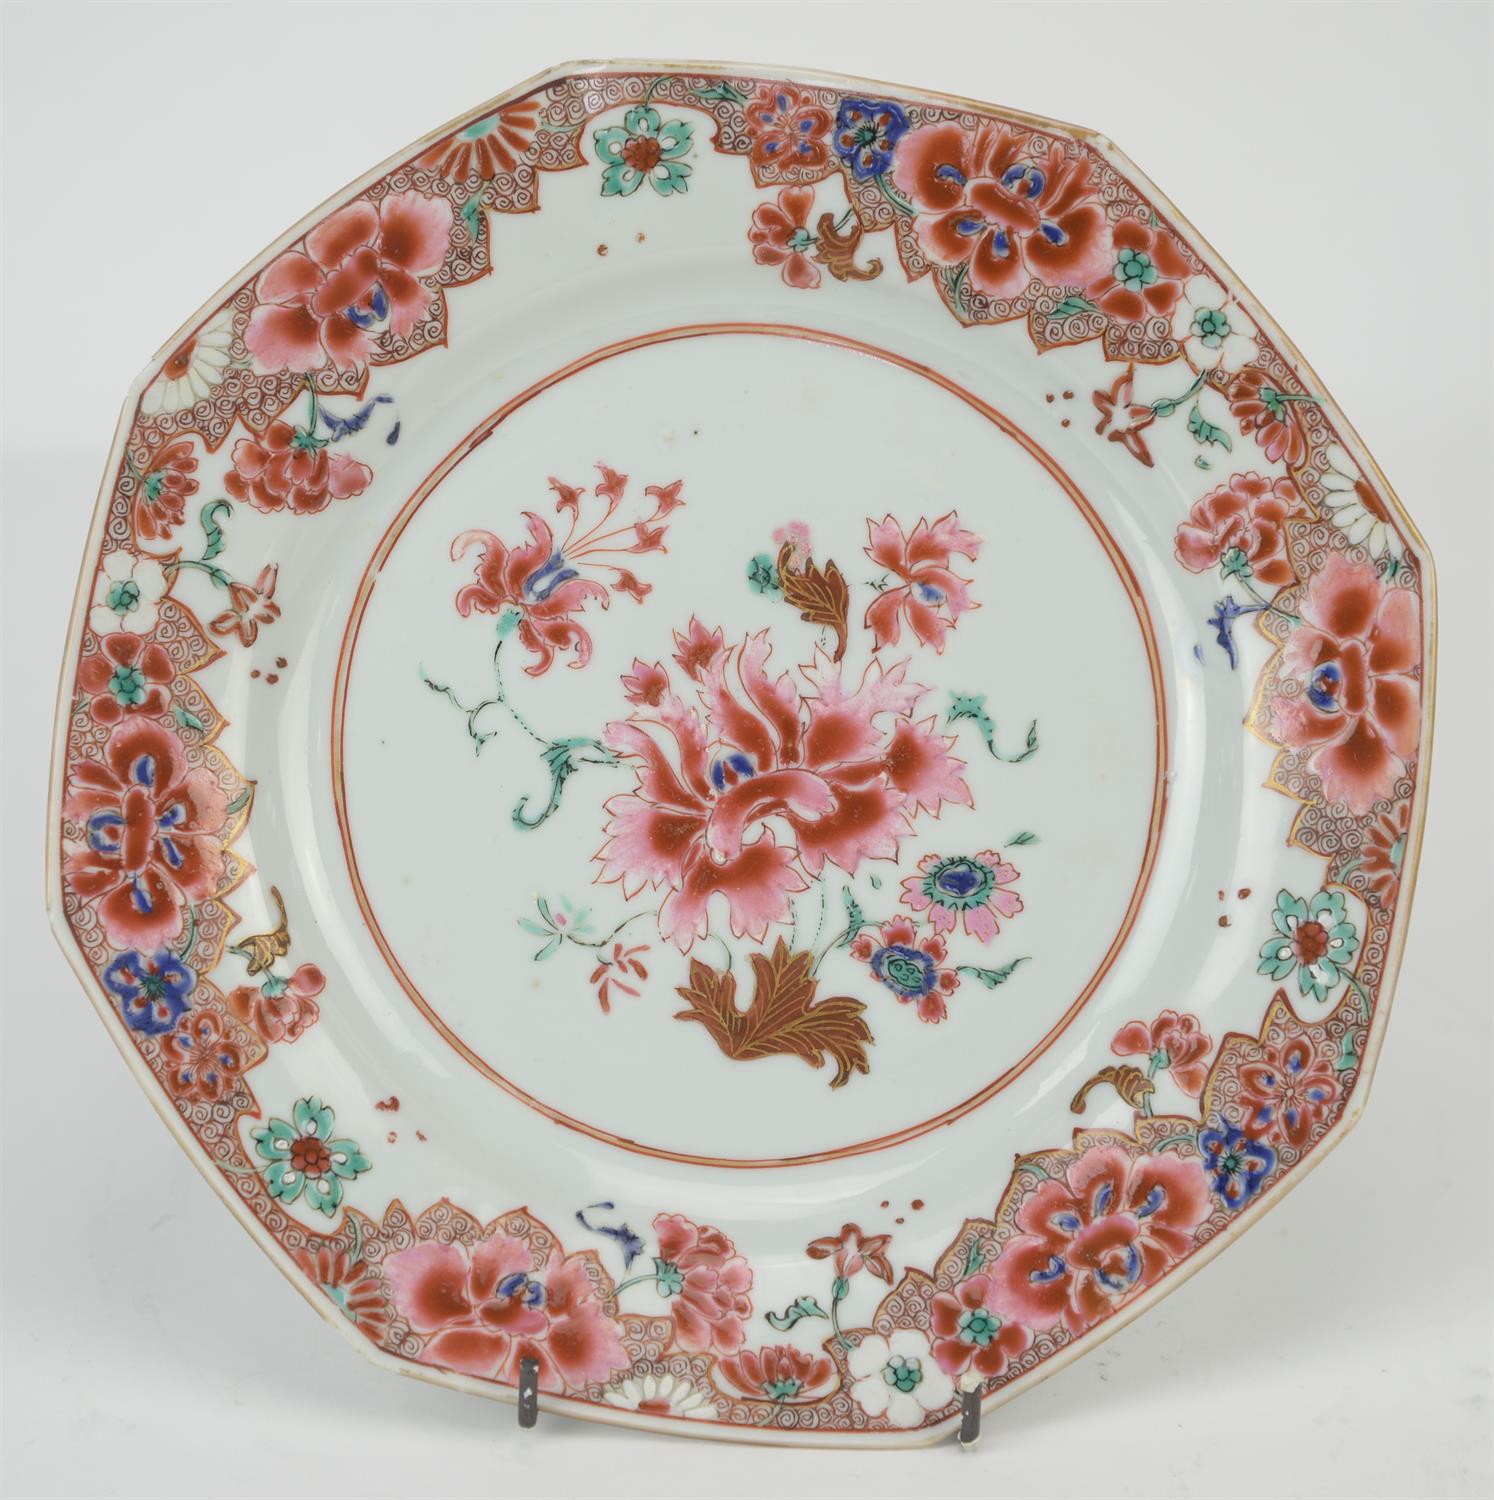 Eight famille rose dishes; each one decorated with floral designs and about 22.5 cm diameter, - Image 14 of 28